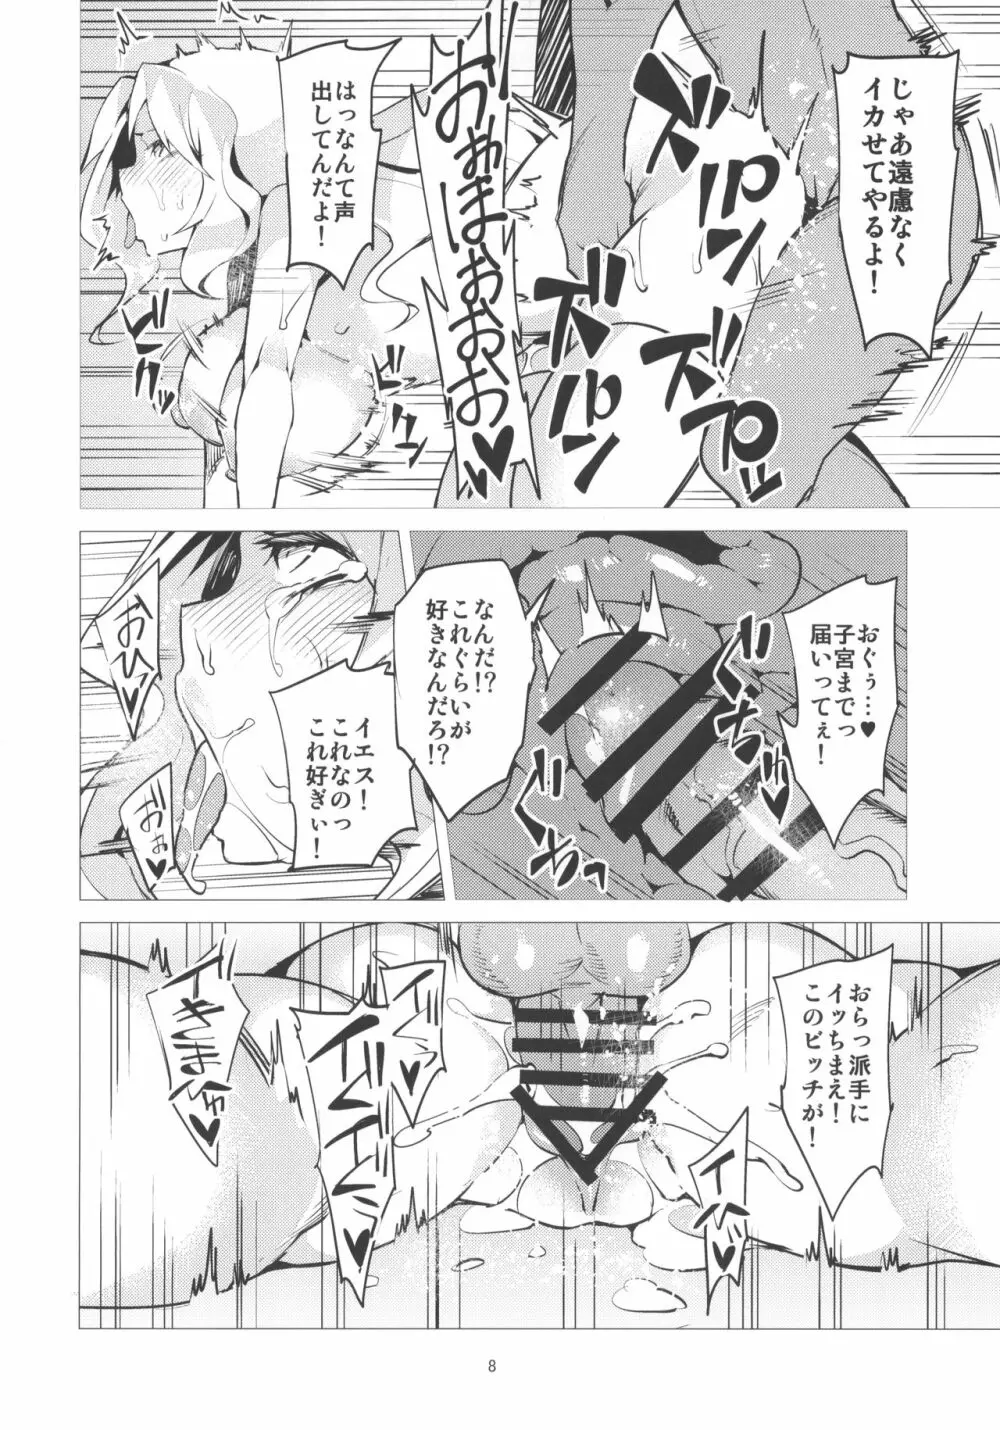 PANZERSTIC BEASTと腰使いの民 - page7